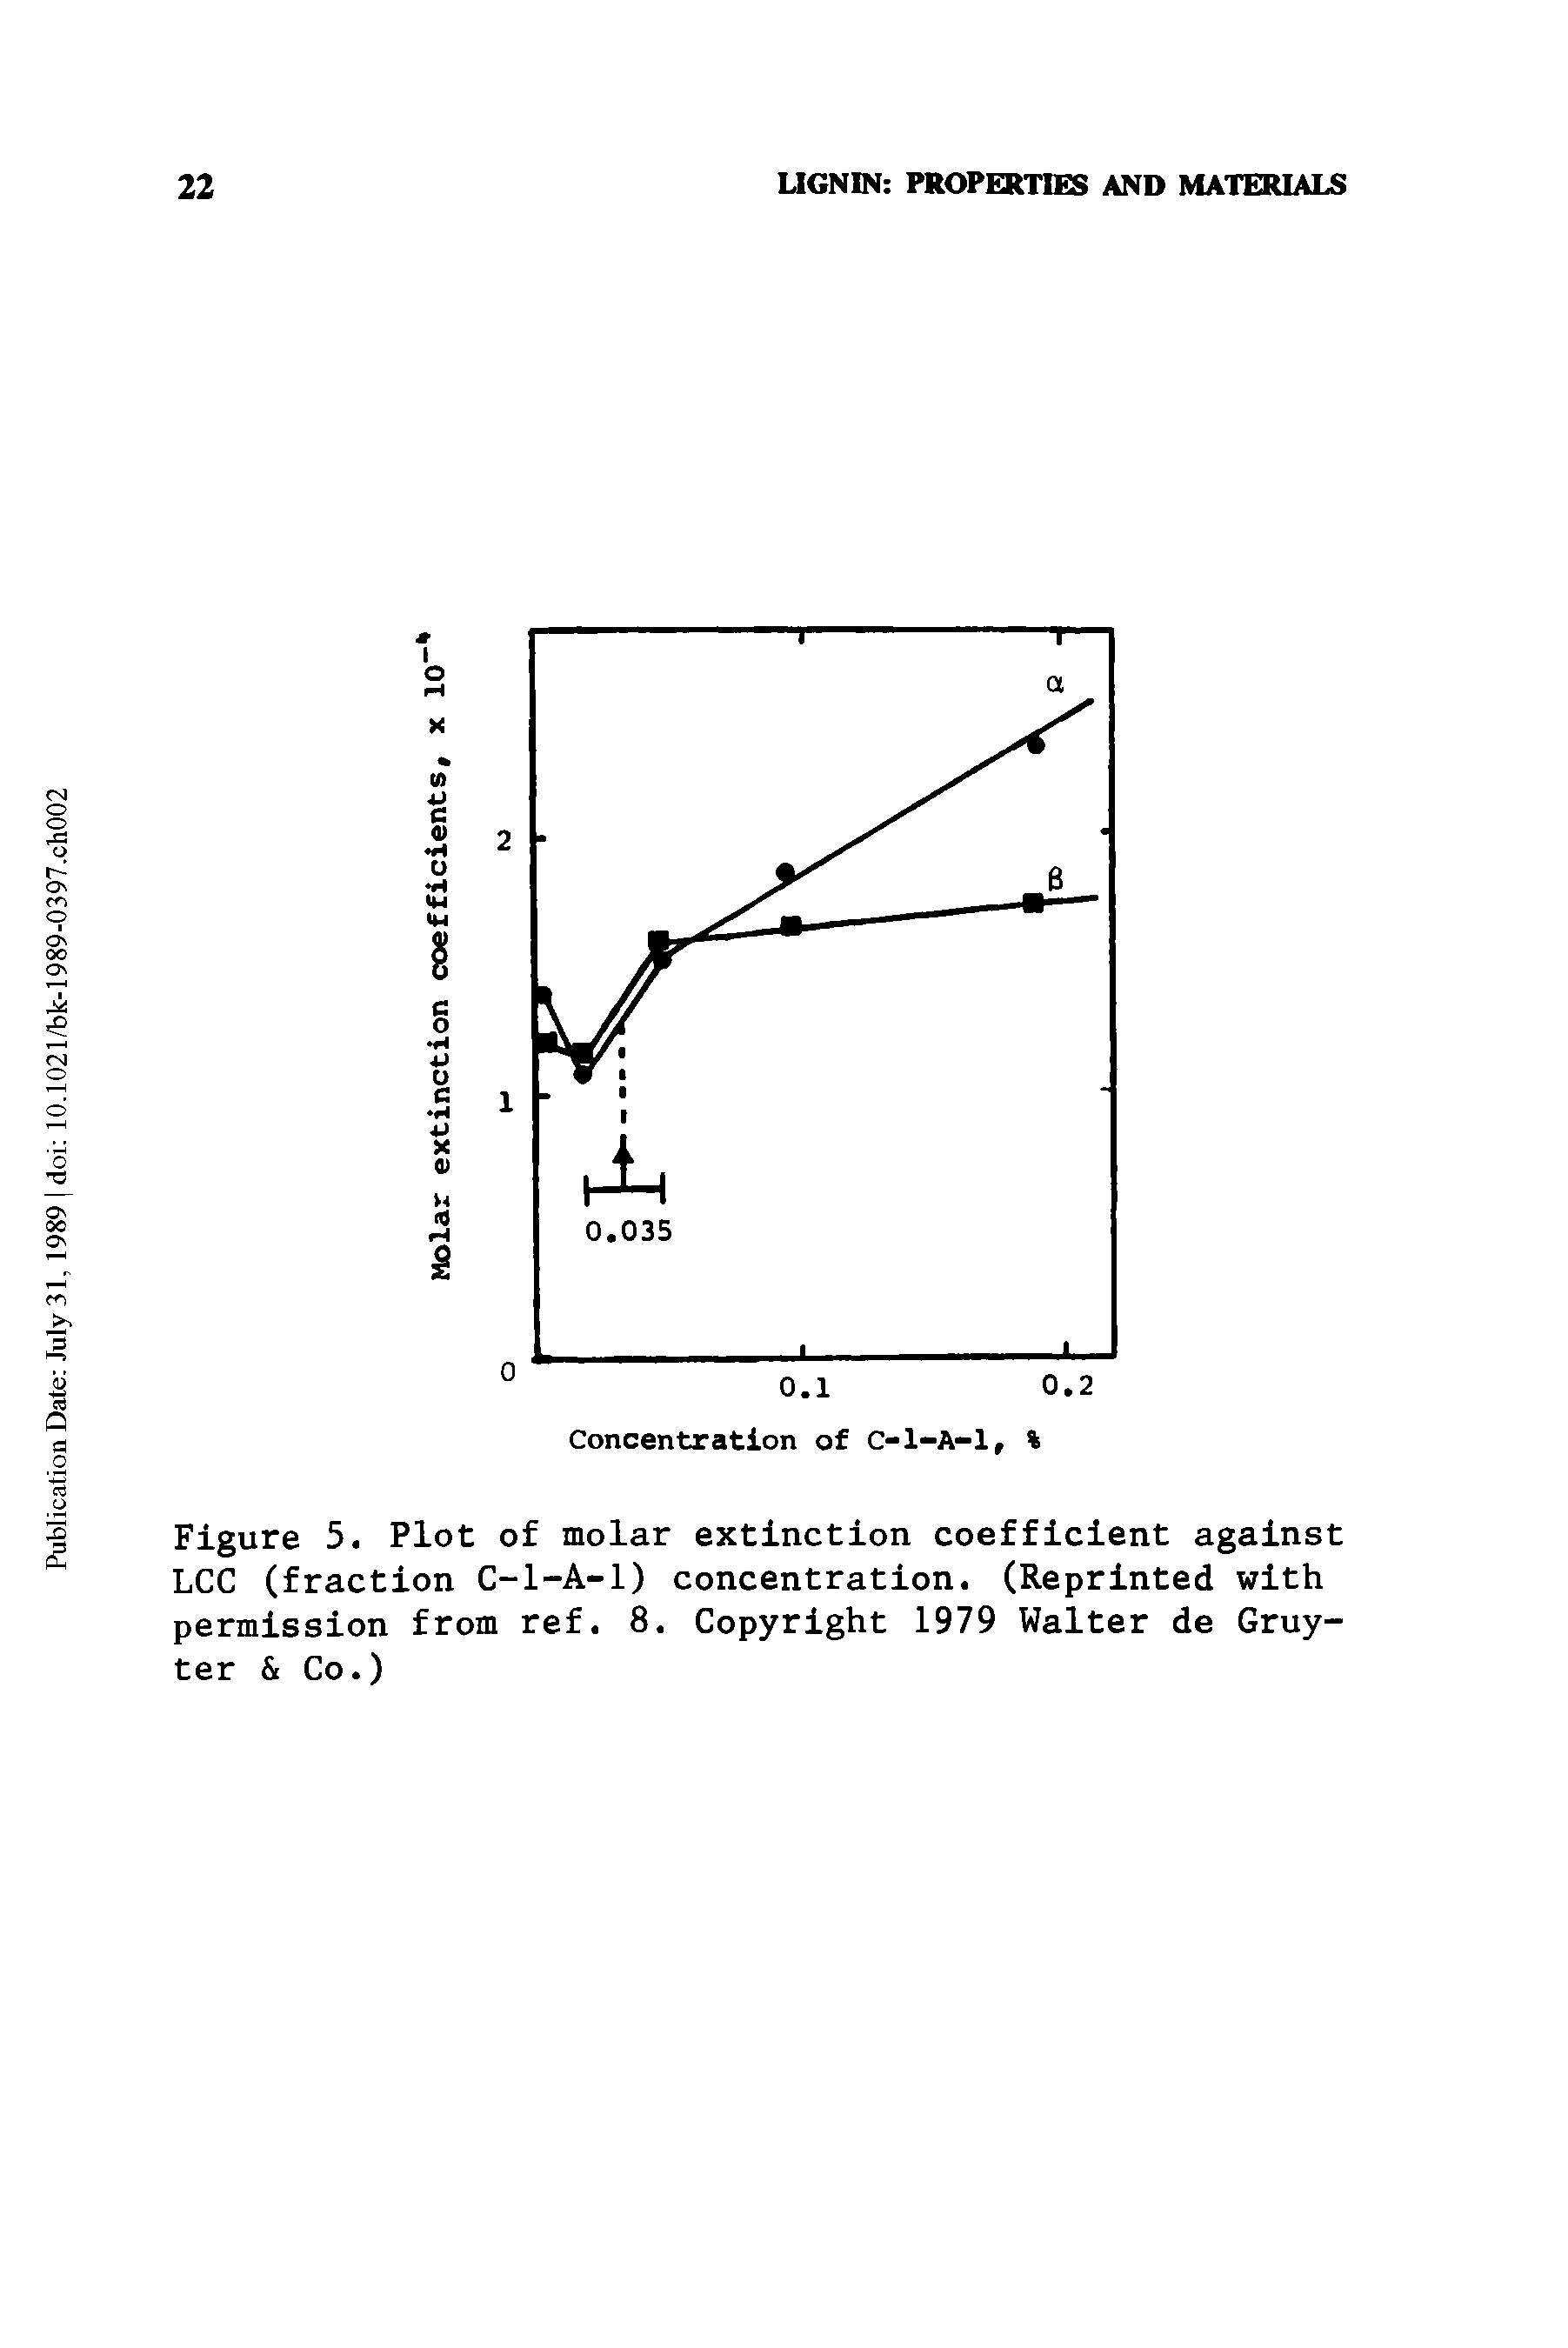 Figure 5. Plot of molar extinction coefficient against LCC (fraction C-l-A-1) concentration. (Reprinted with permission from ref. 8. Copyright 1979 Walter de Gruy-ter Co.)...